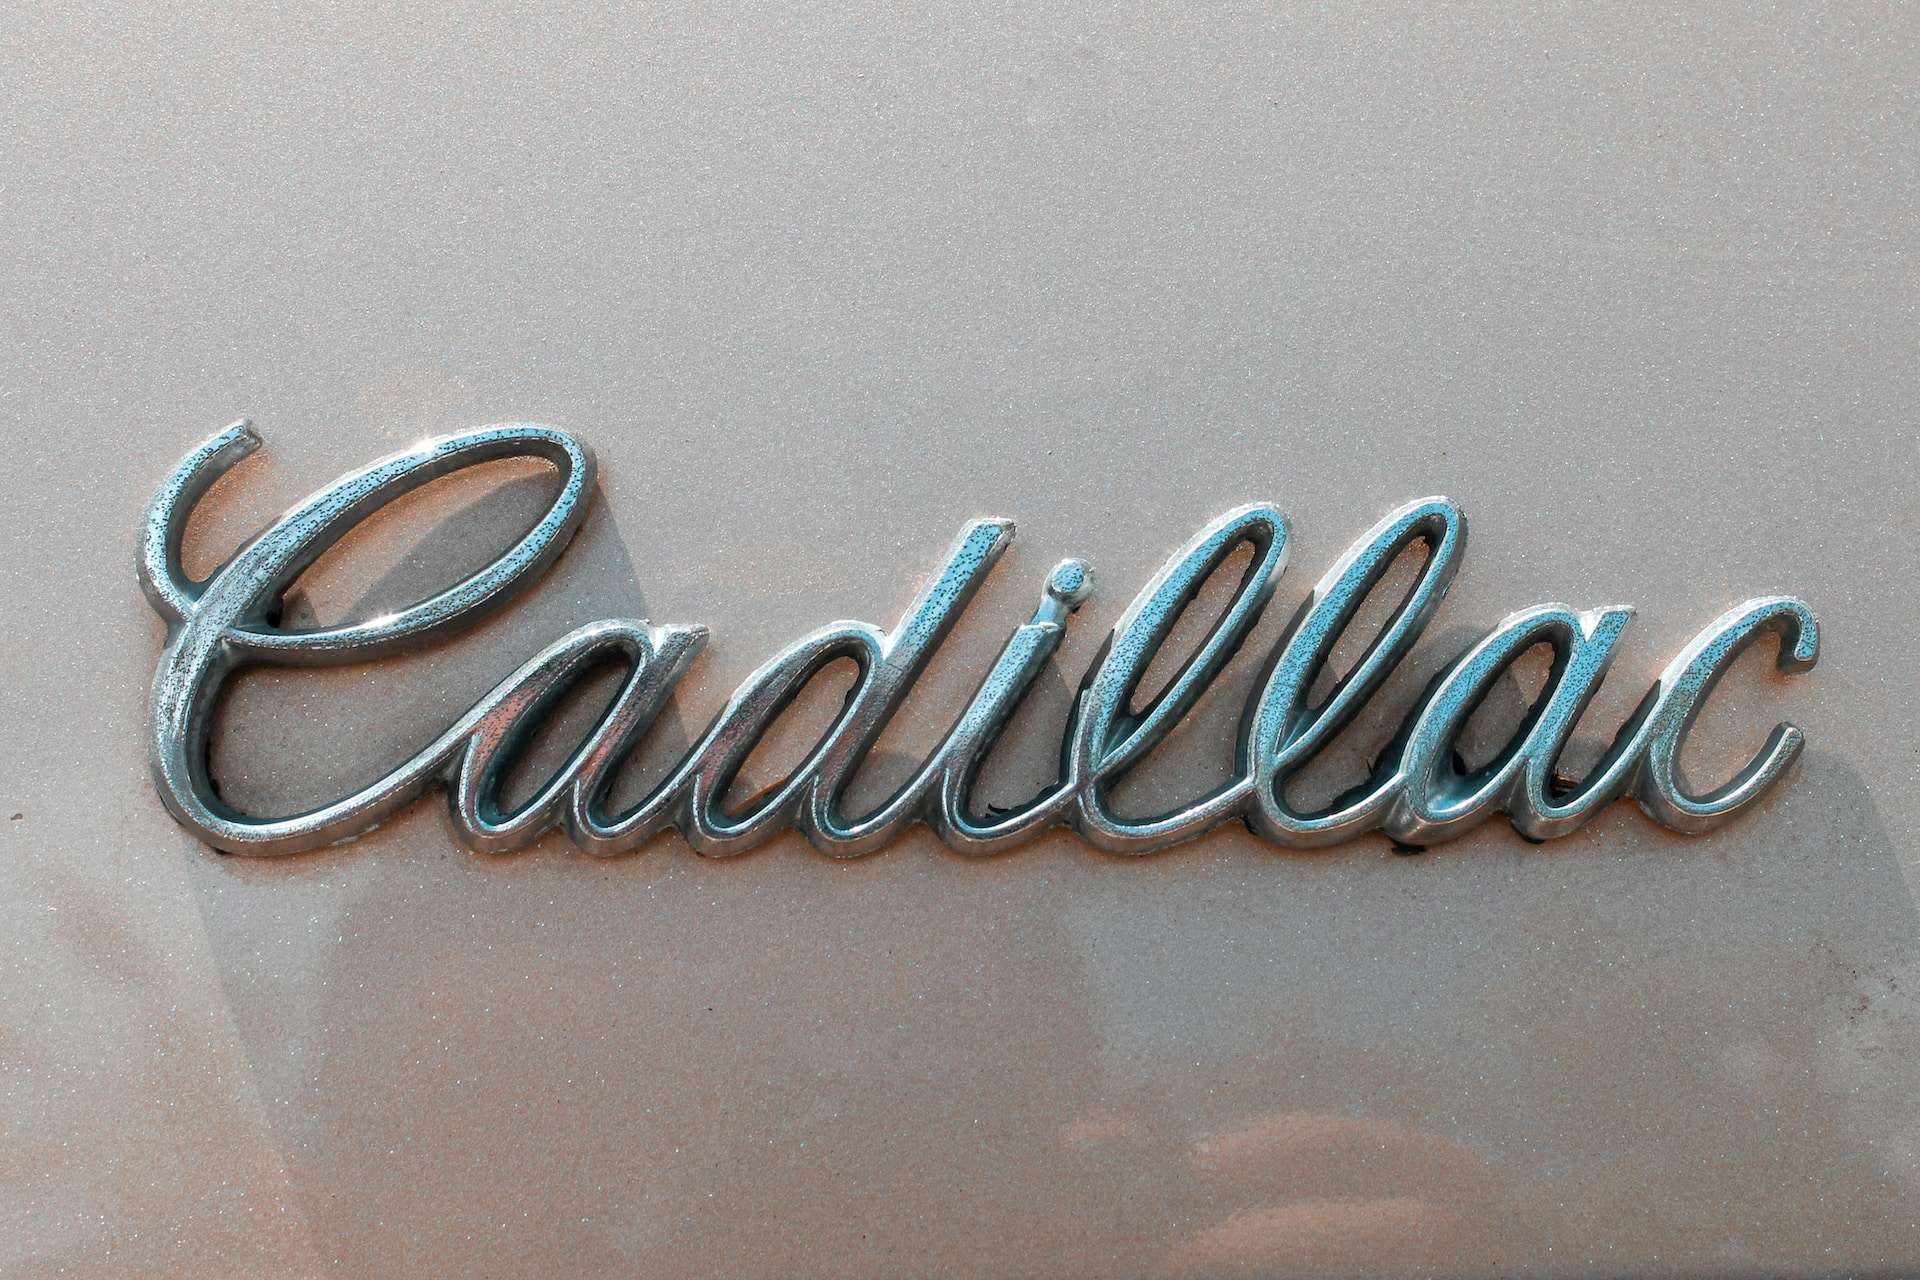 15-facts-about-cadillac